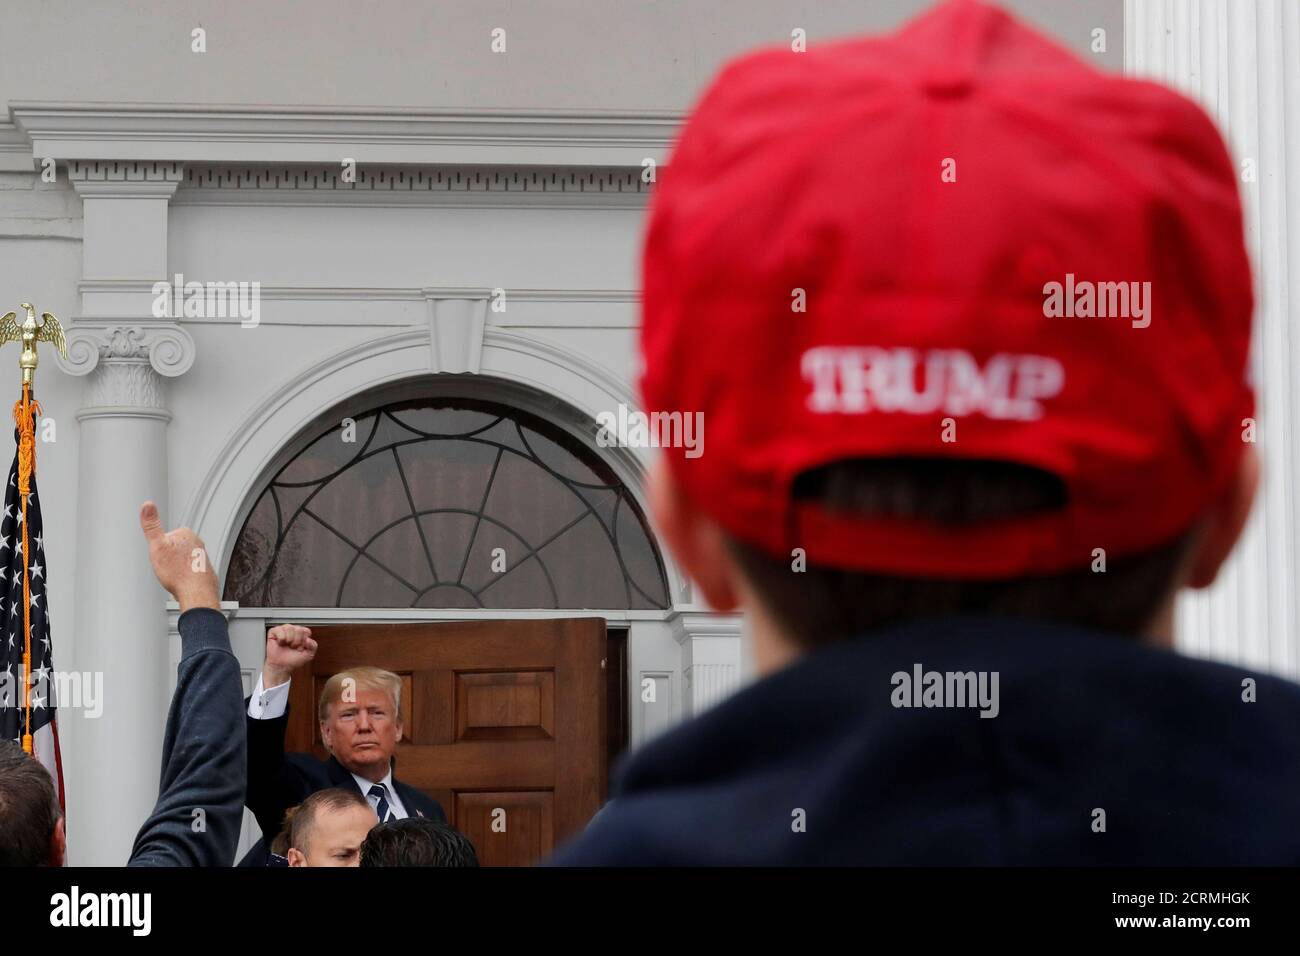 U.S. President Donald Trump meets with supporters from a group called 'Bikers for Trump' at the Trump National Golf Club in Bedminster, New Jersey, U.S., August 11, 2018. REUTERS/Carlos Barria Stock Photo